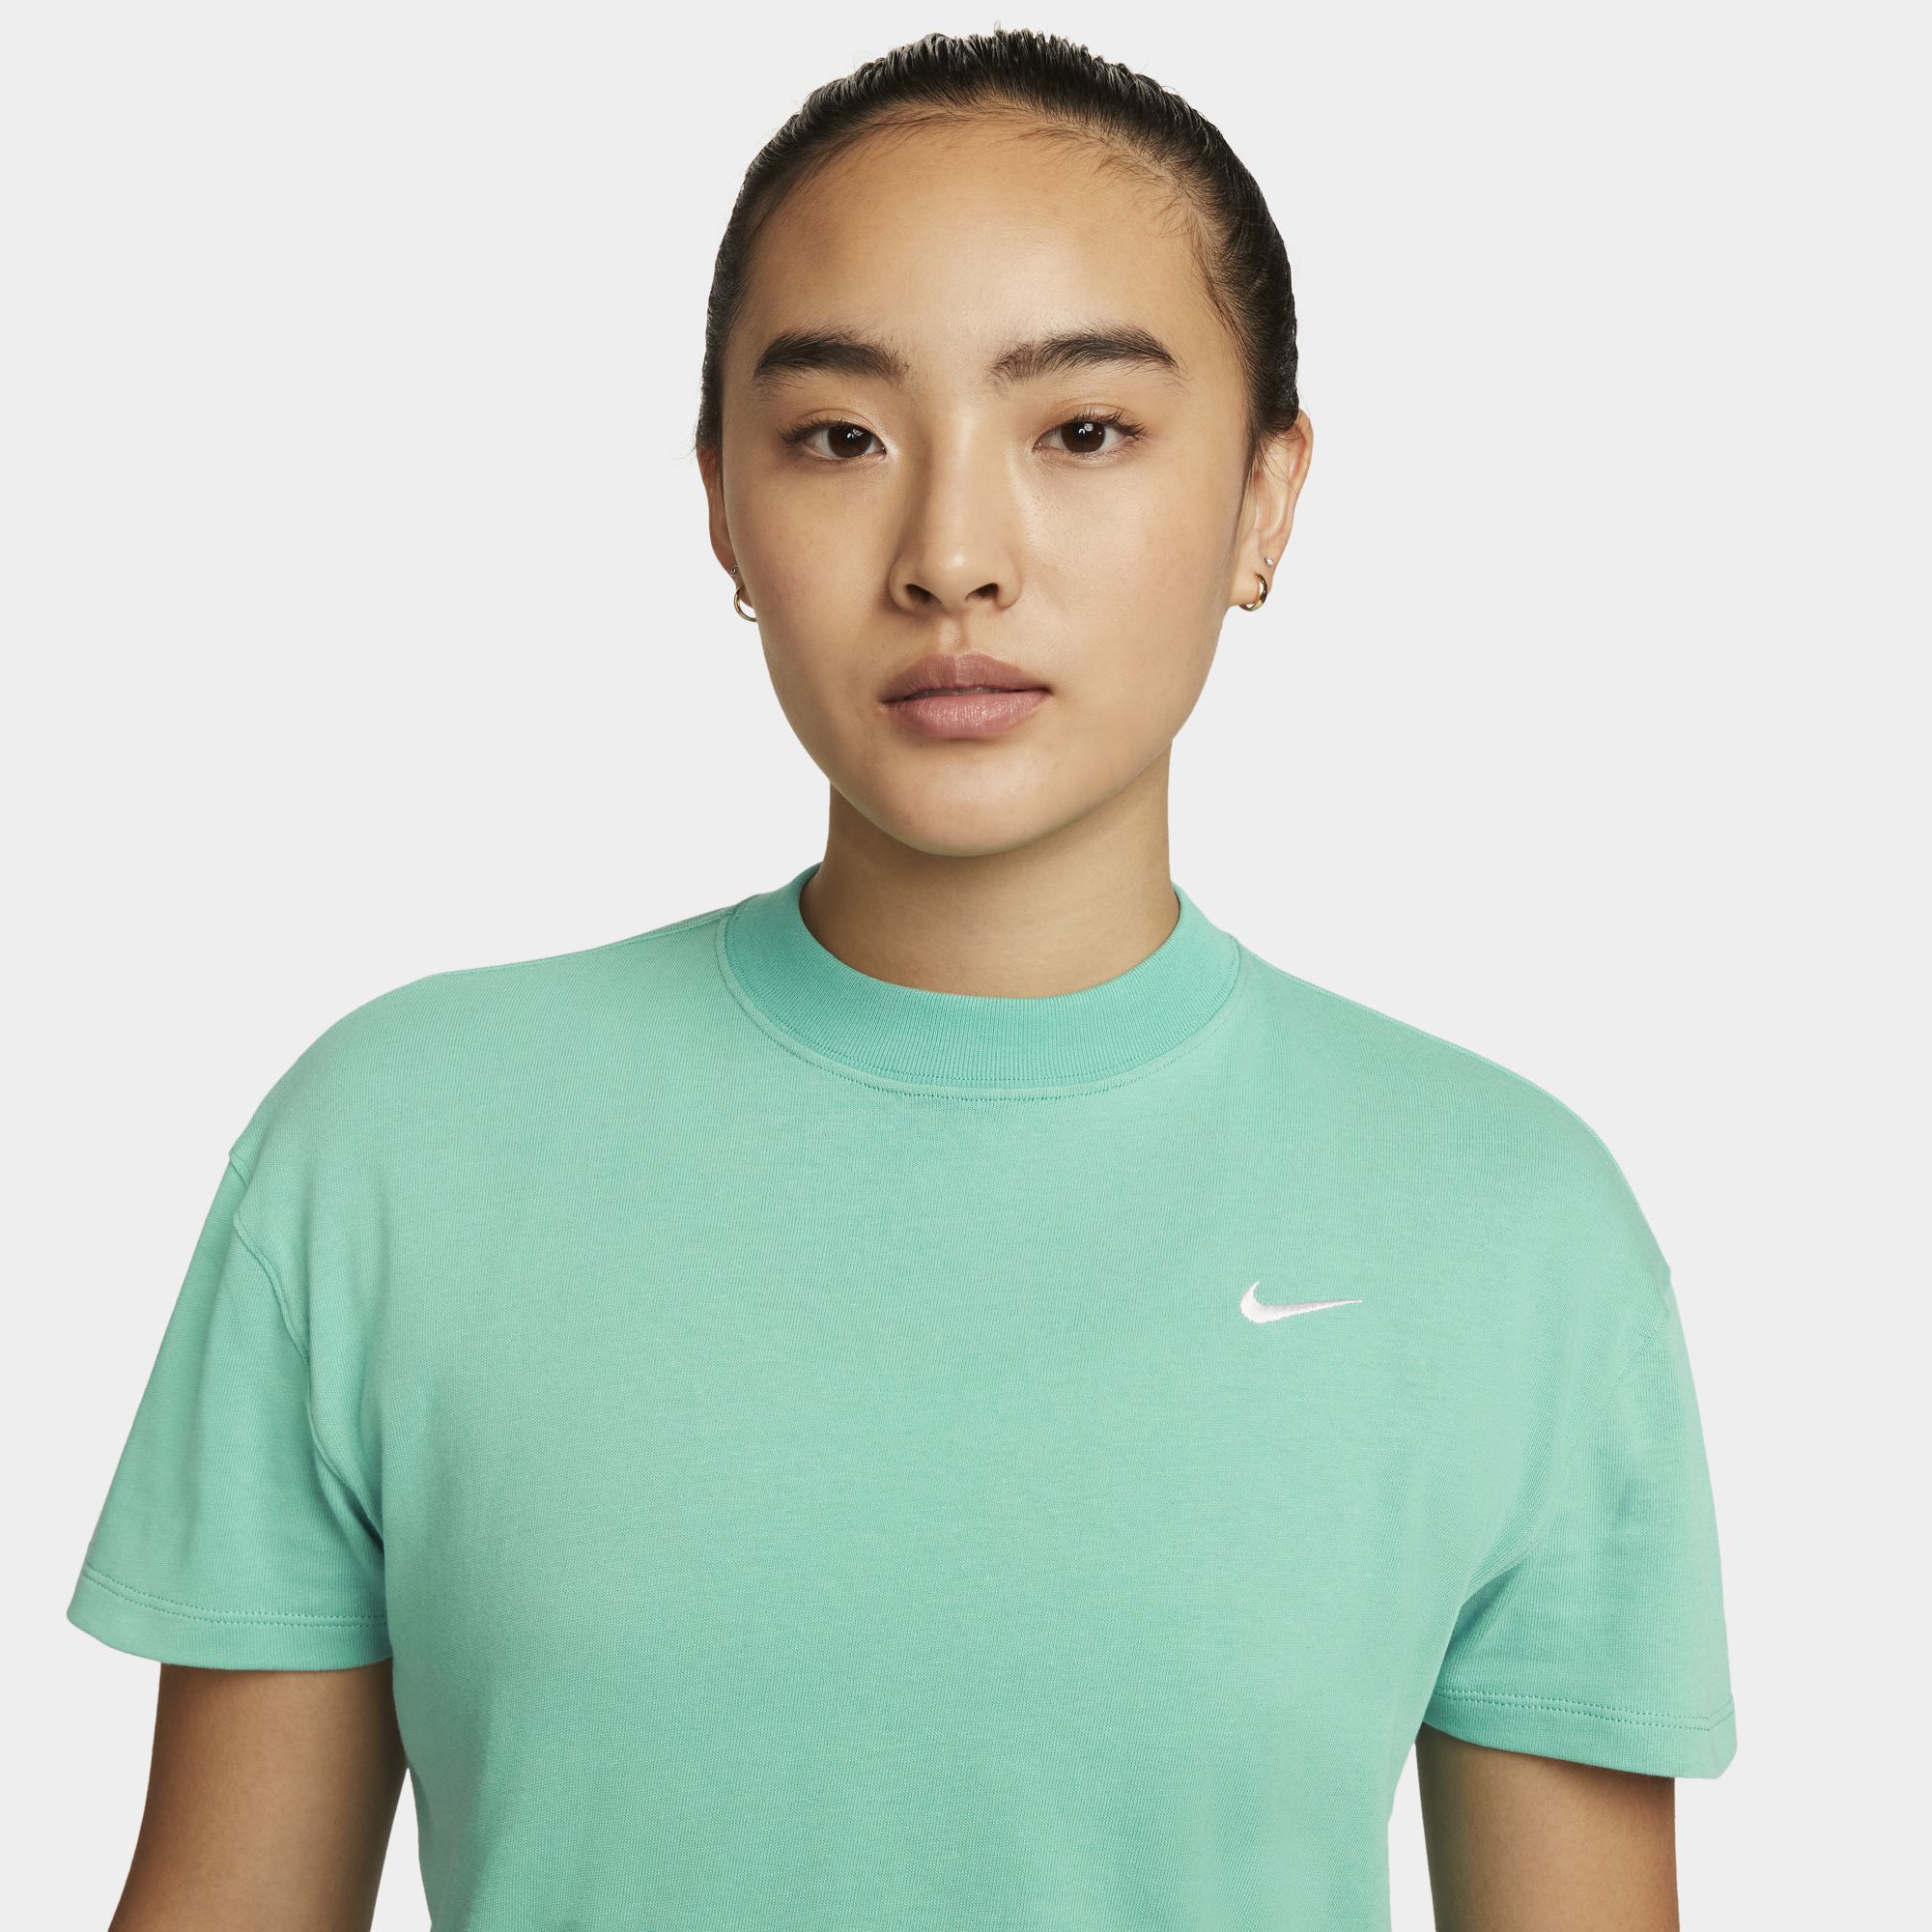 As W Nrg Solo Swoosh SS Tee - INVINCIBLE